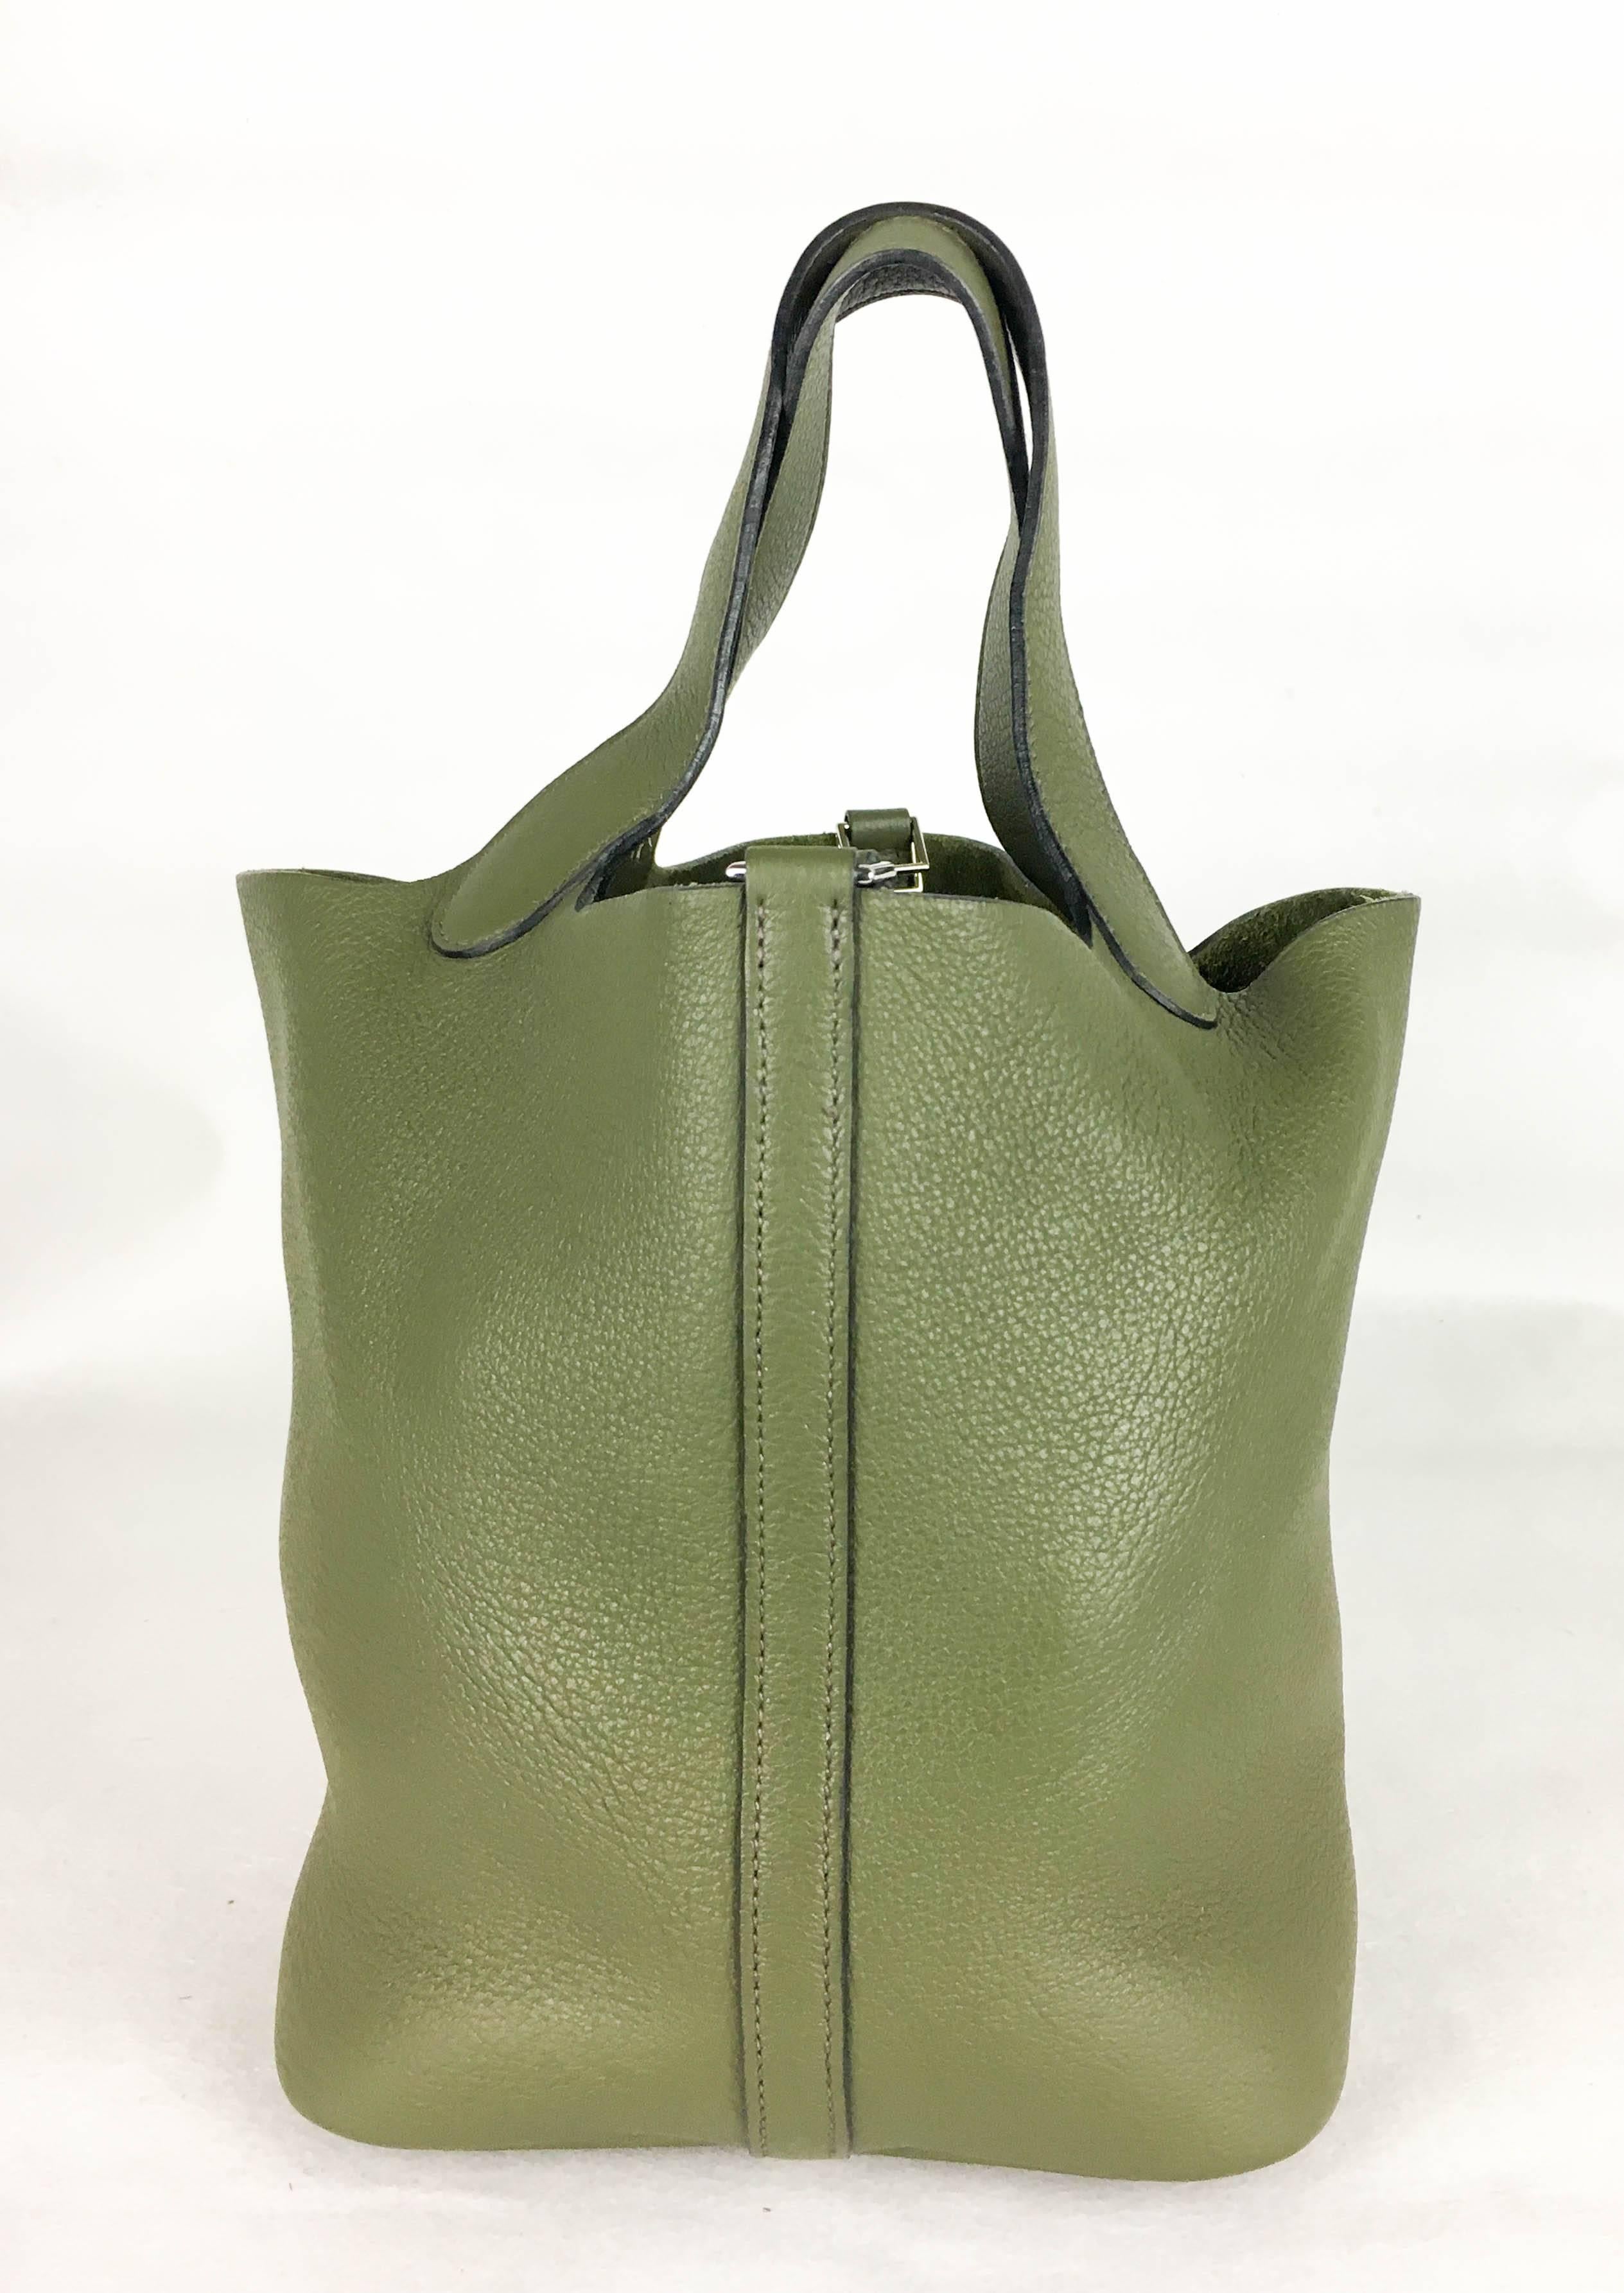 Brown 2007 Hermes Picotin 22 Handbag in Olive Green Clemence Leather For Sale